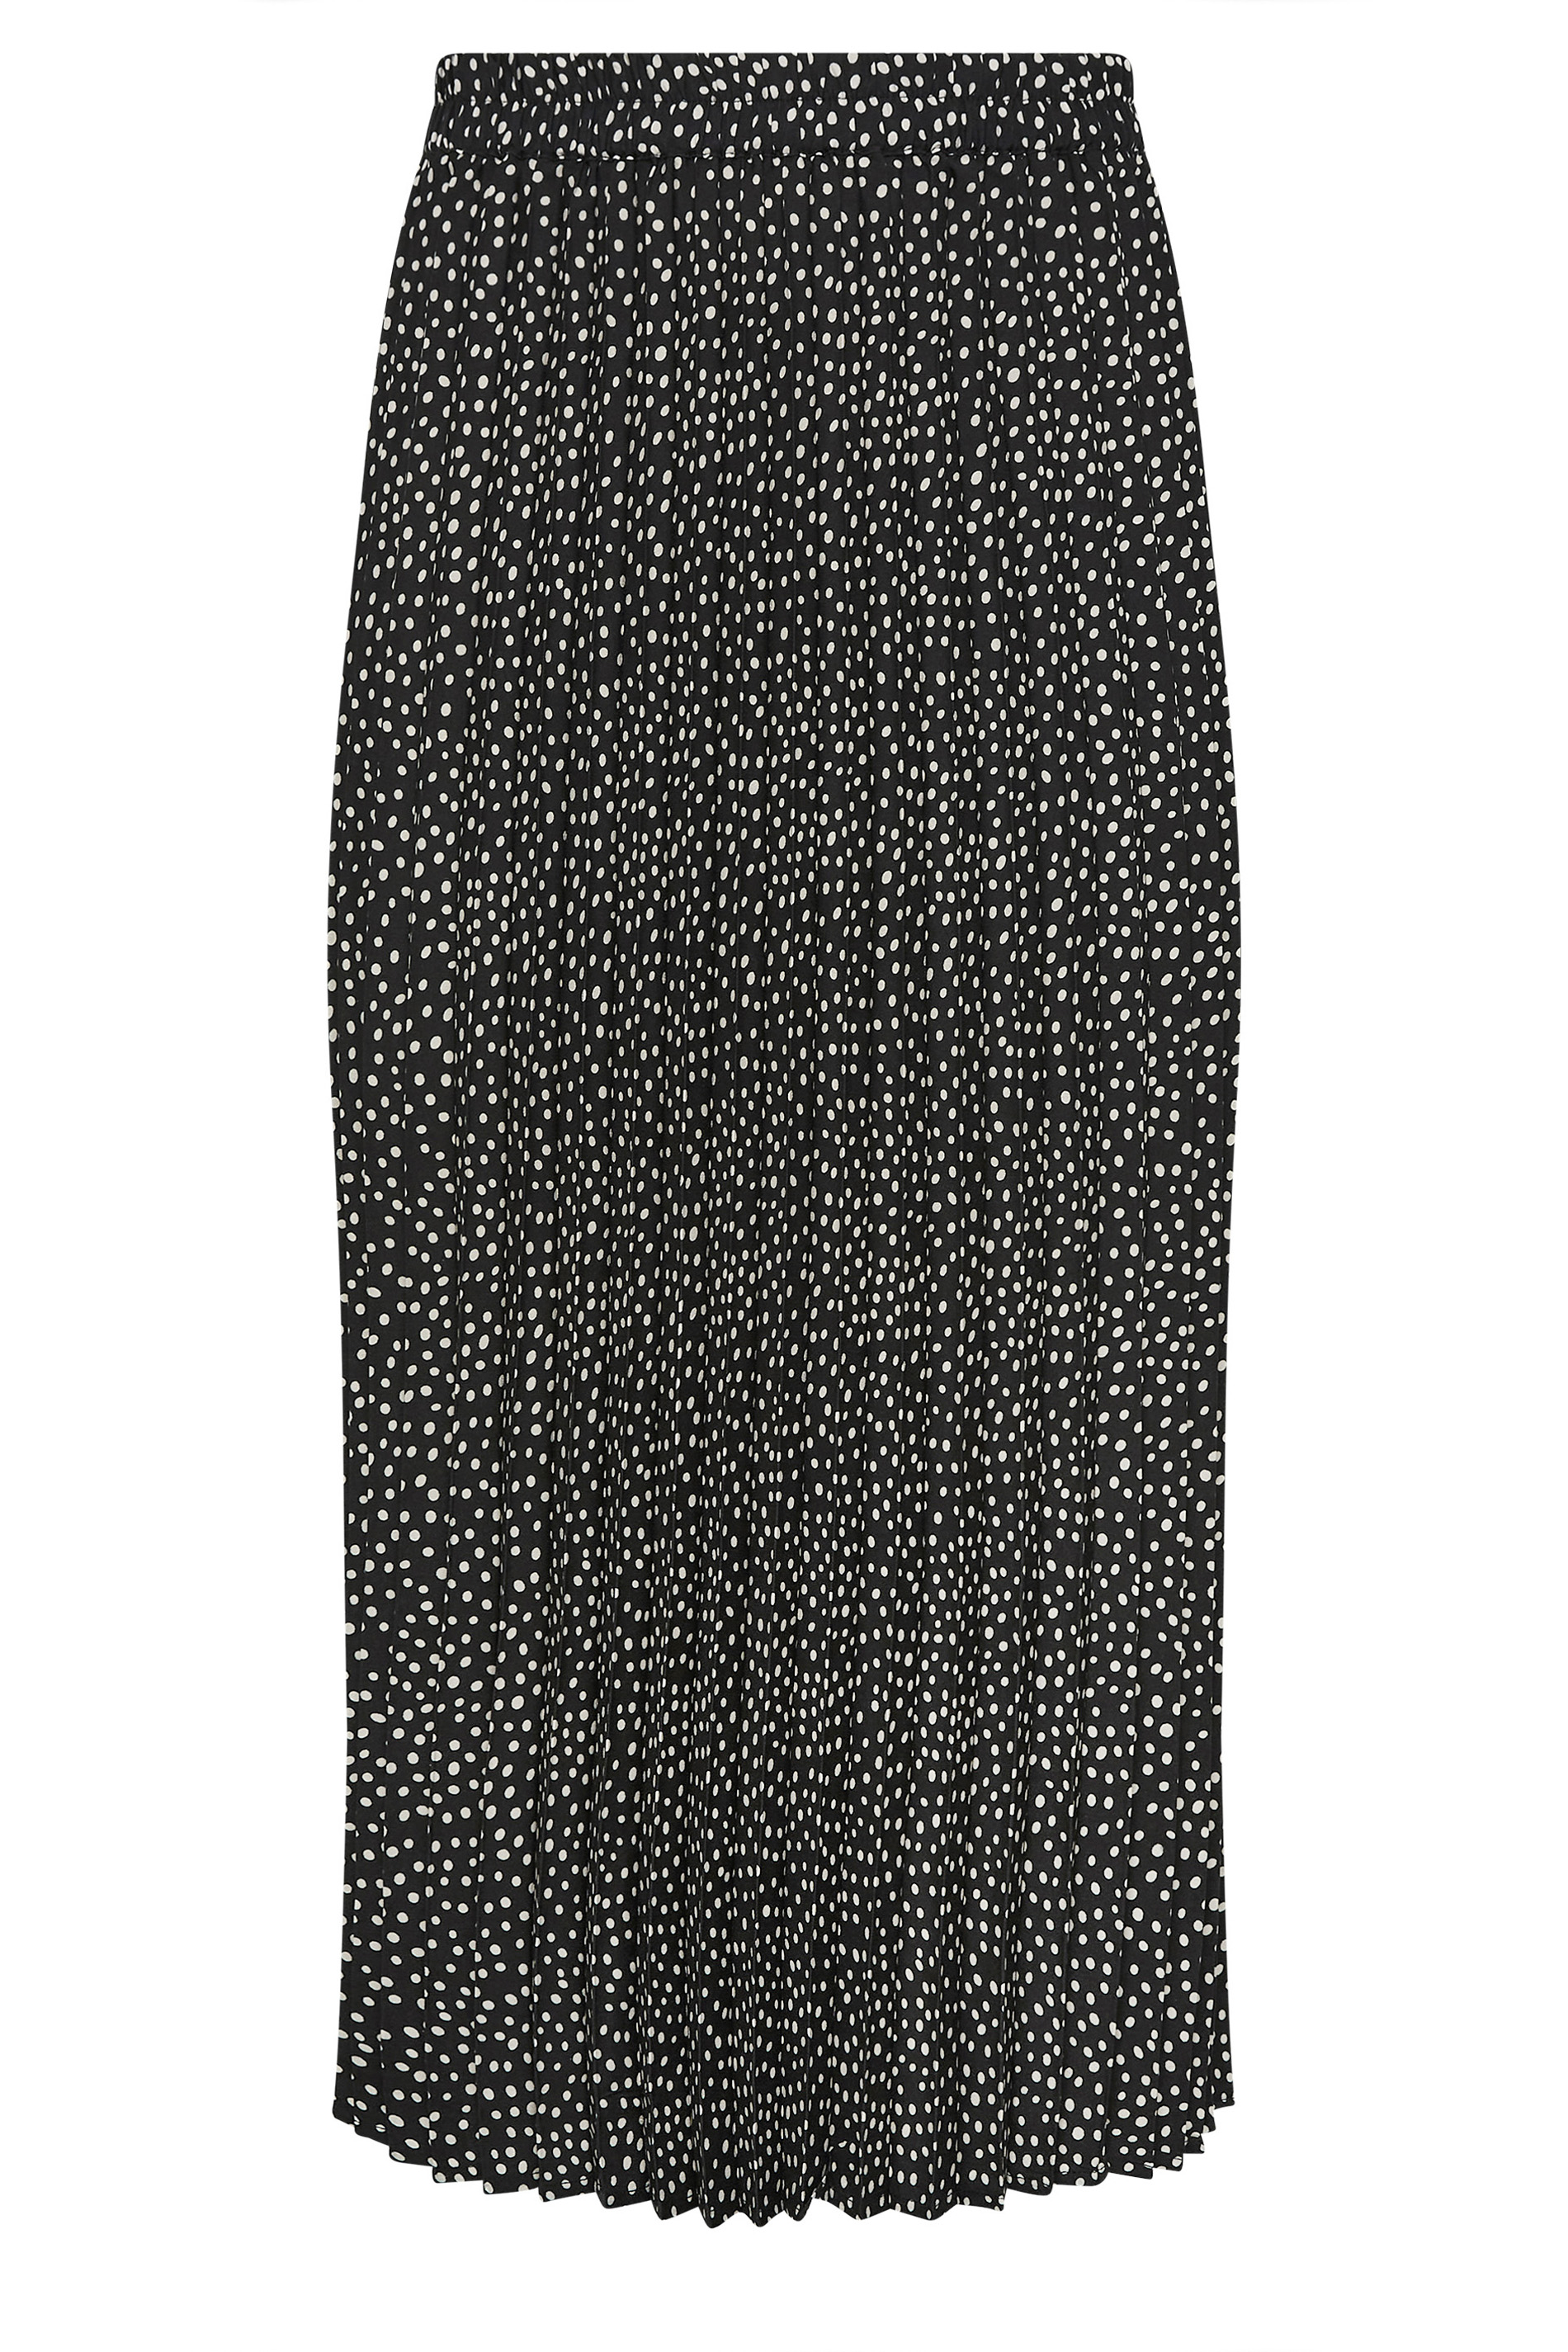 YOURS PETITE Plus Size Black Spot Print Pleated Skirt | Yours Clothing 1